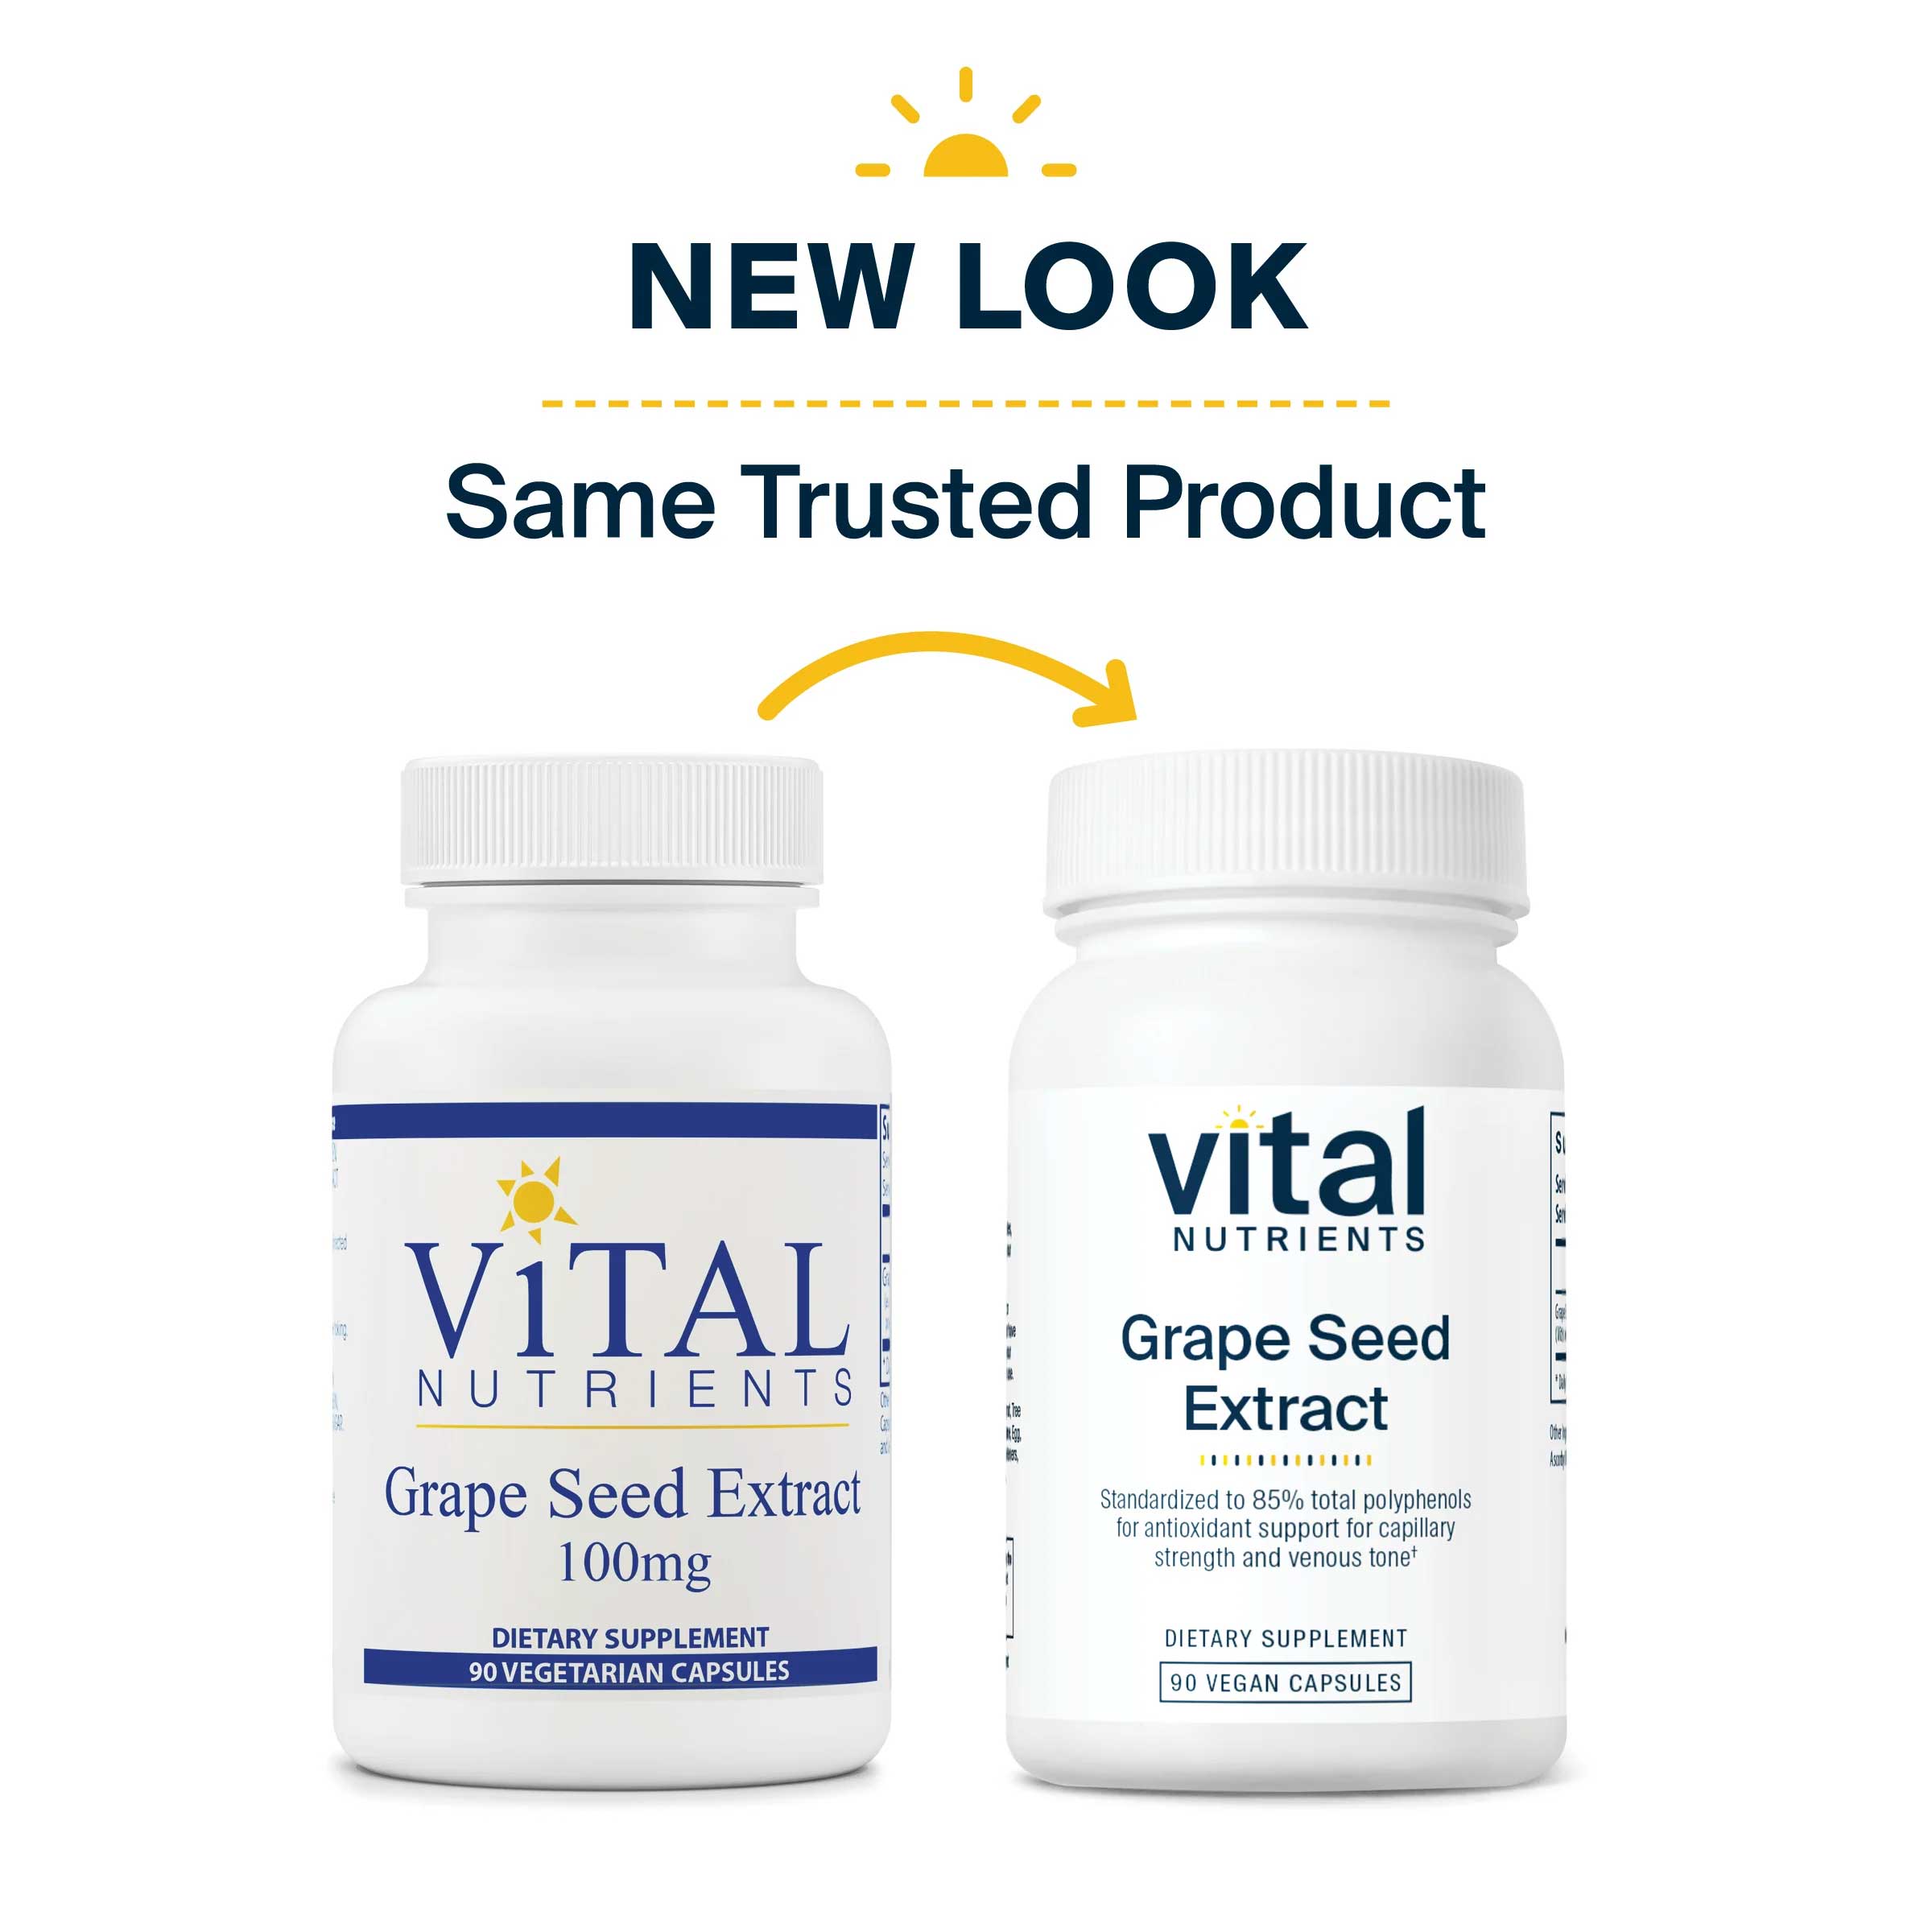 Vital Nutrients Grape Seed Extract 100mg New Look